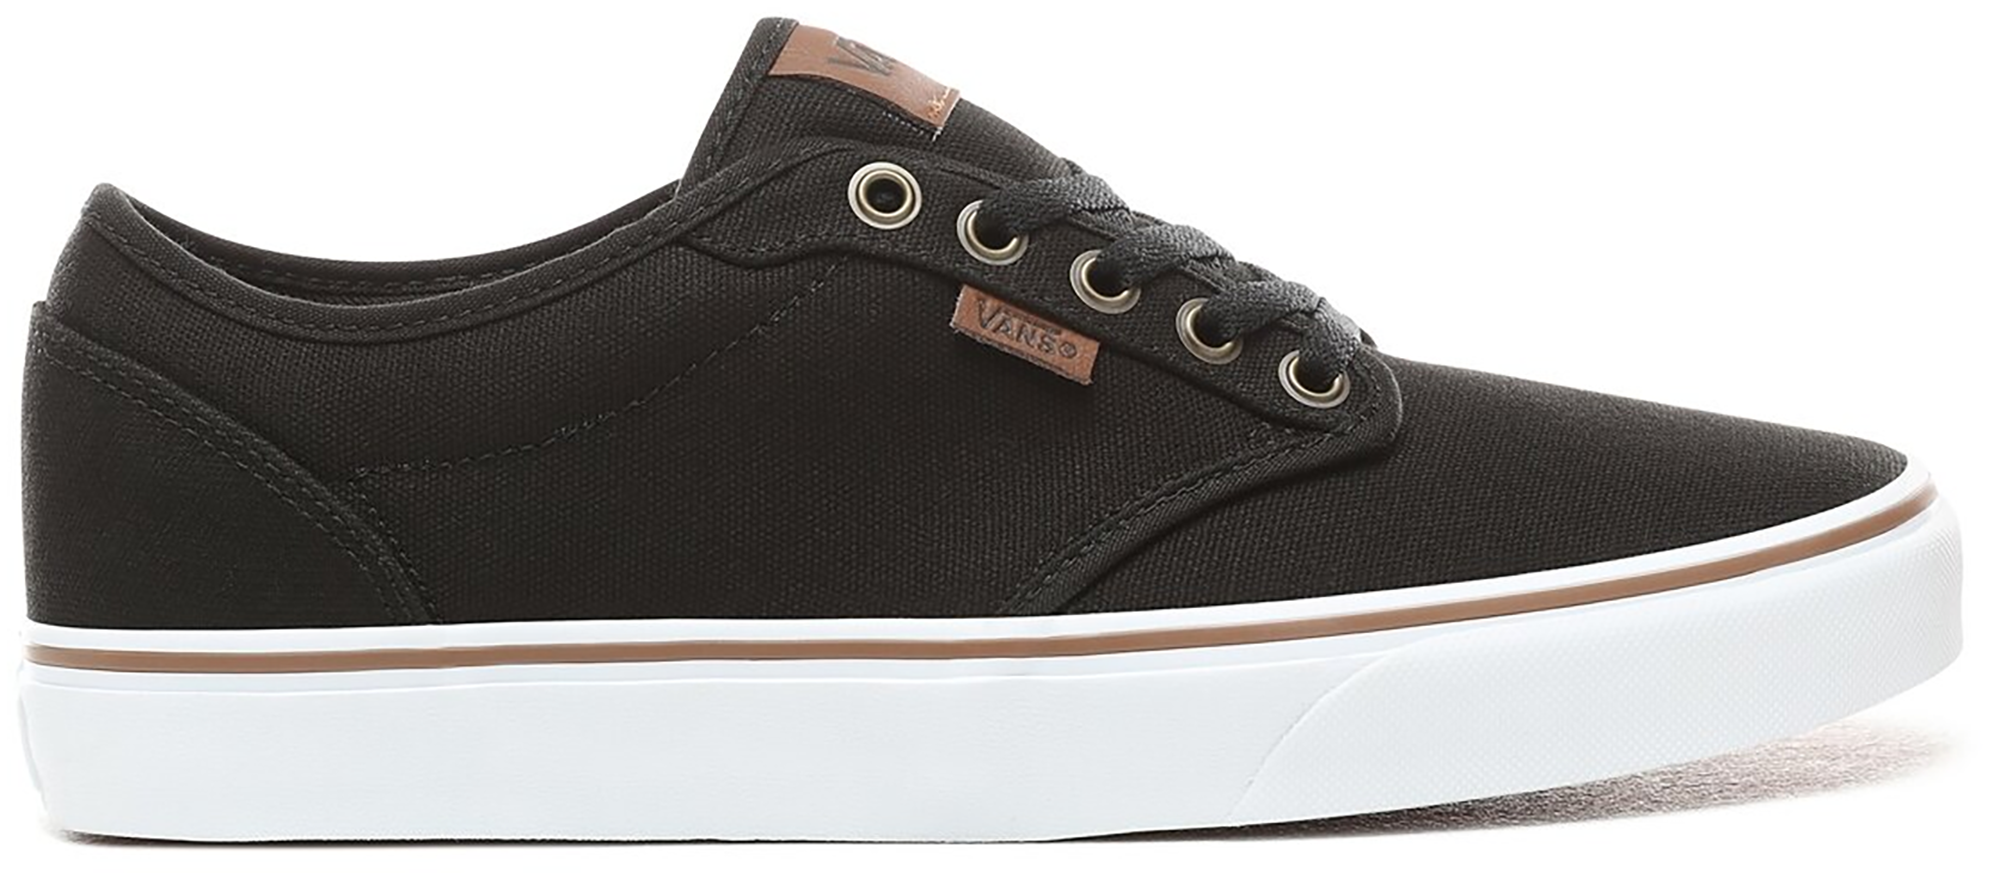 vans leather atwood sneaker